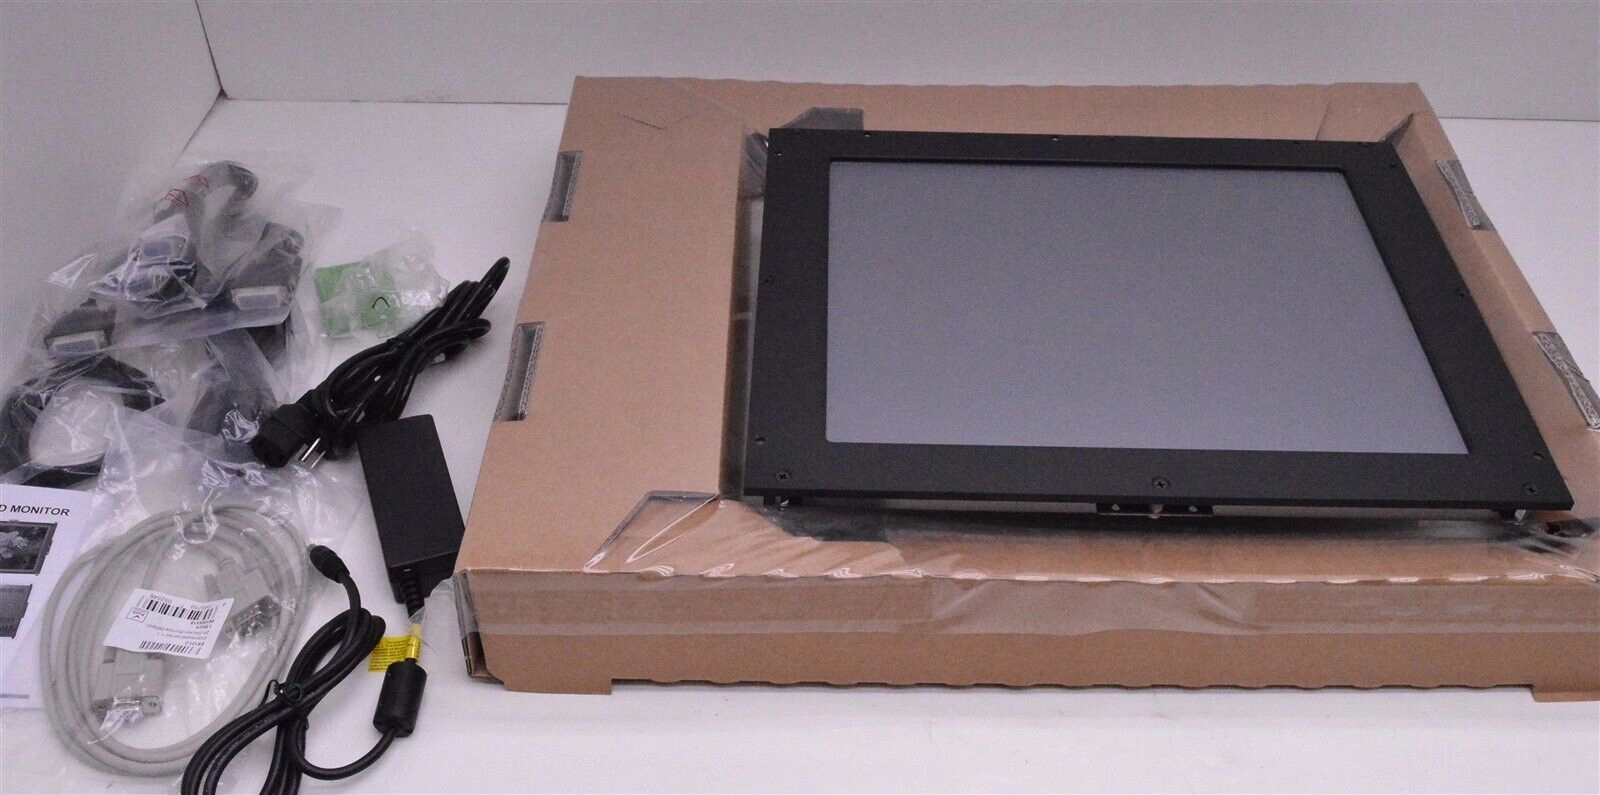 IQ Automation Flatman TFT touch screen display 17"